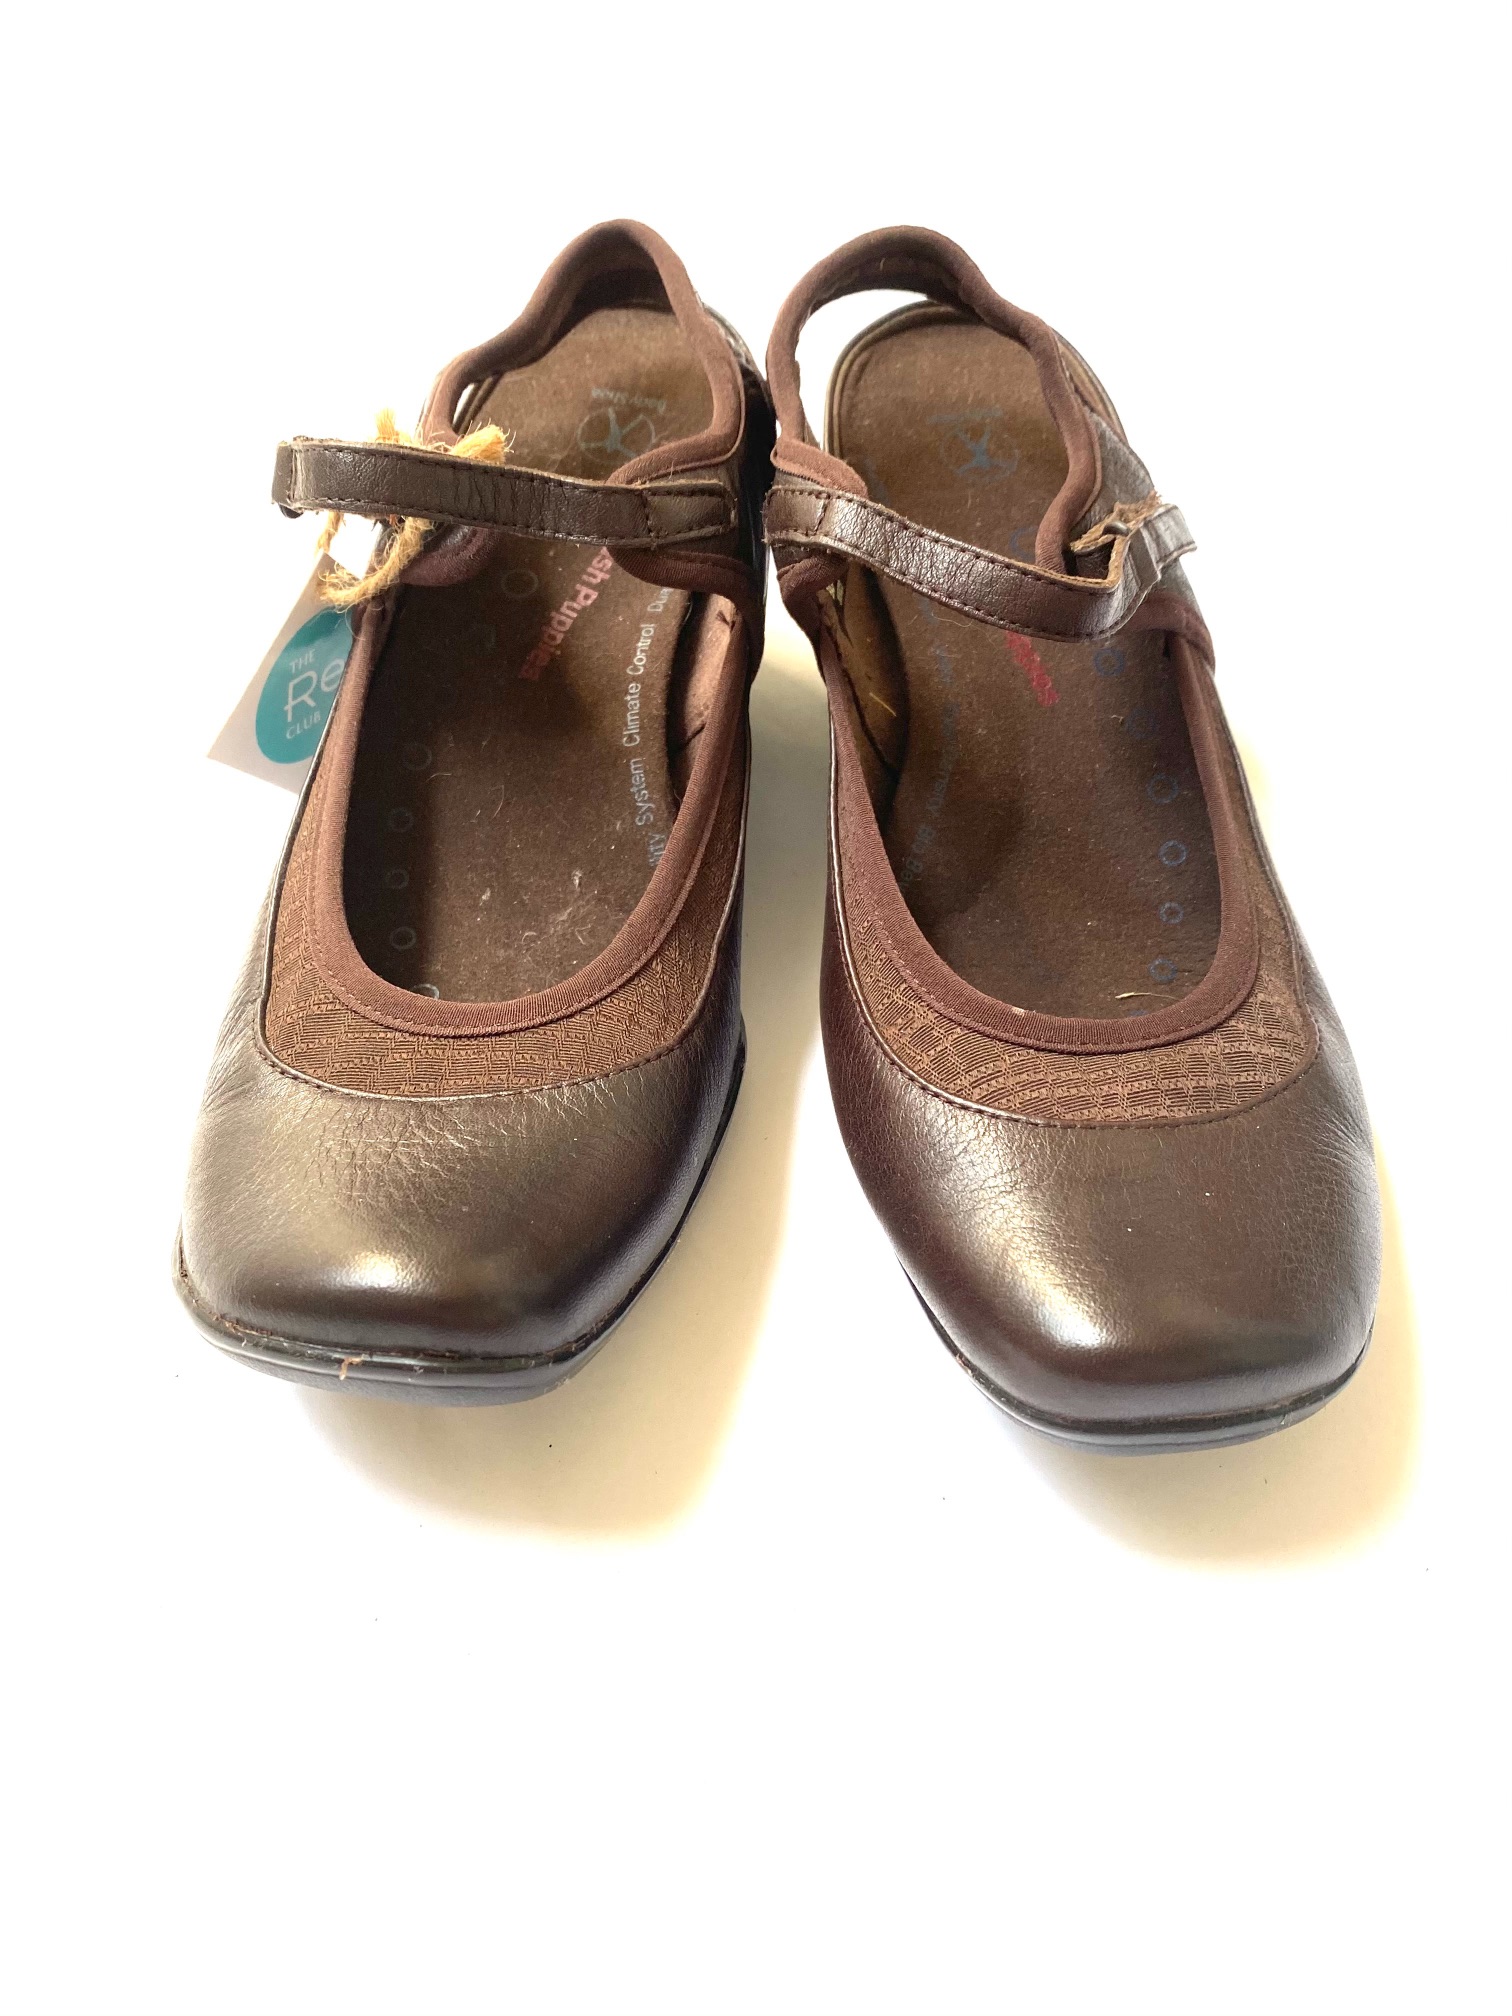 Hush Puppies Low Heeled Shoes - AU Size 7 - The Re: Club